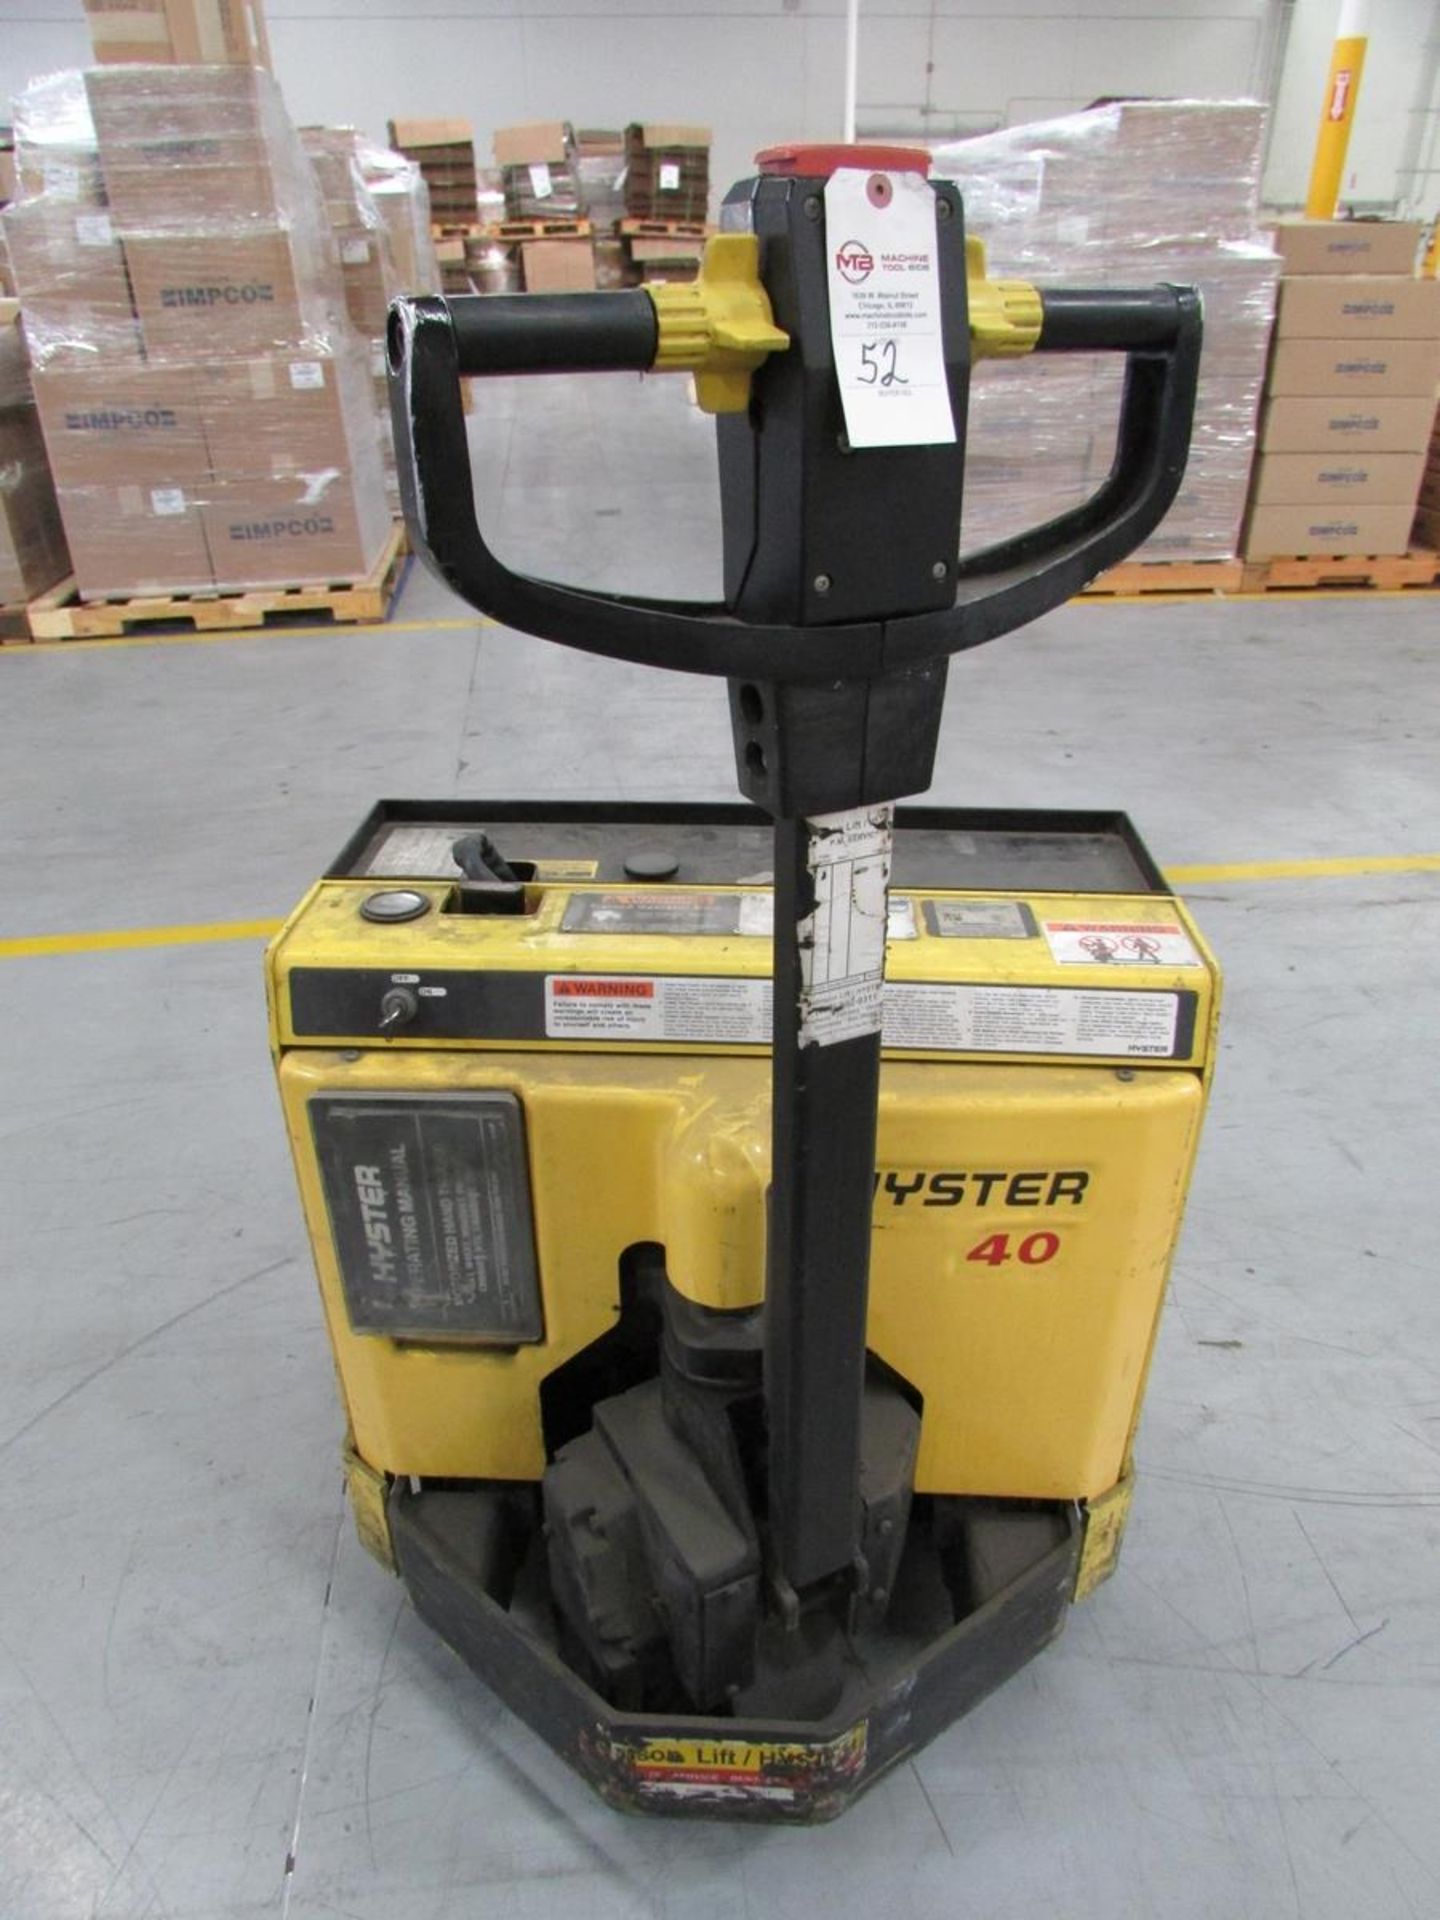 Hyster W40XT 4,000Lb 24V Electric Pallet Lift Truck (2000) - Image 13 of 24